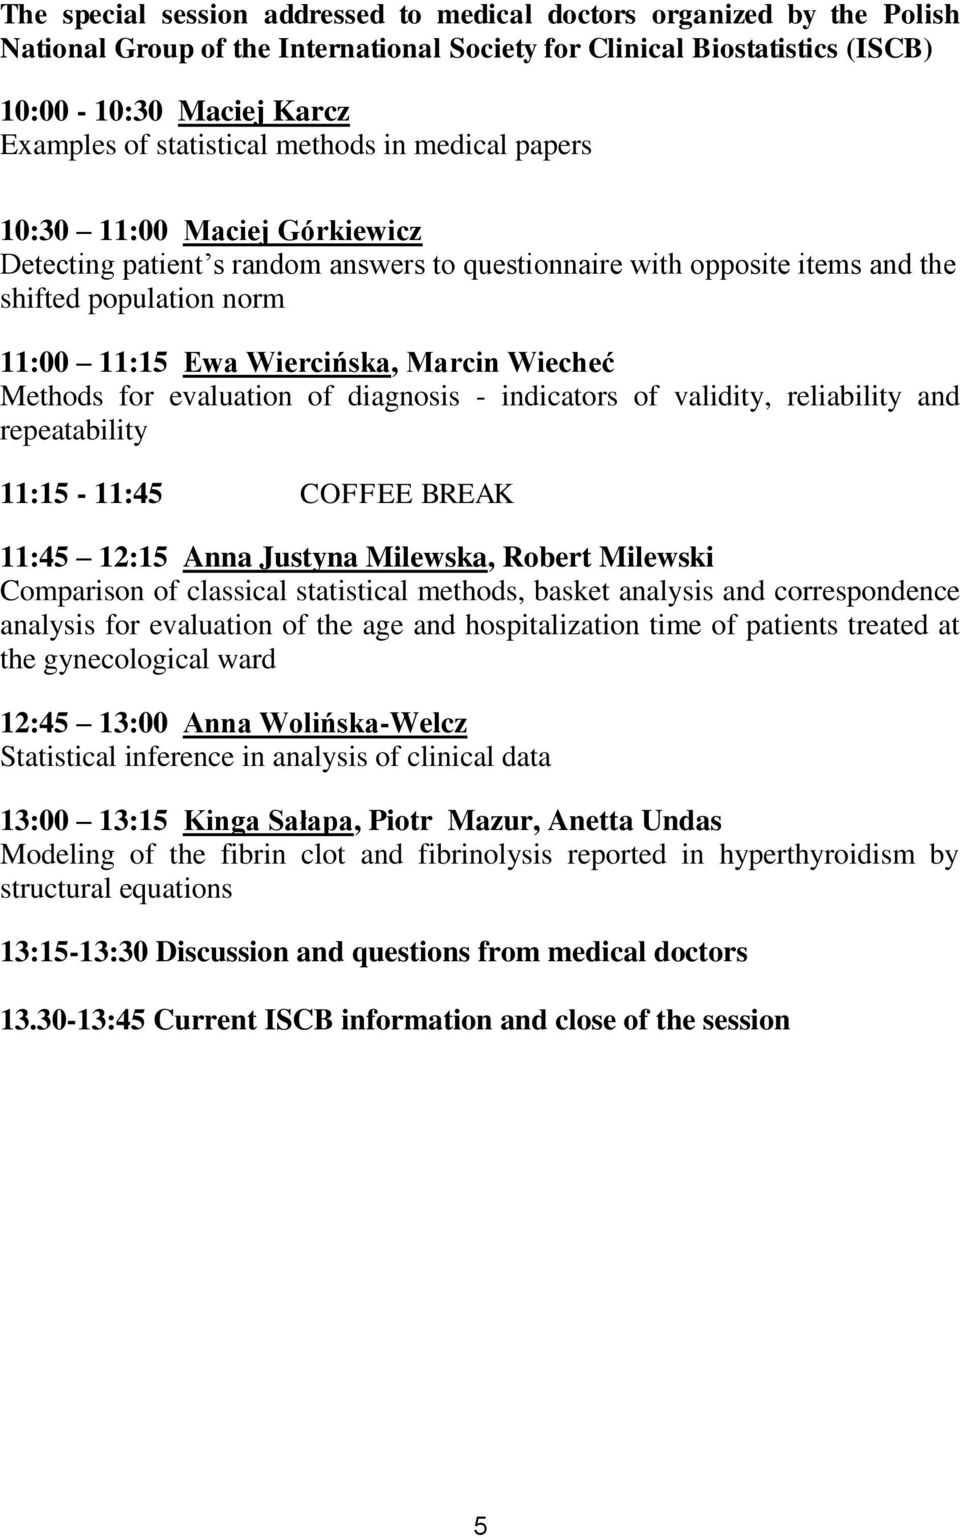 Wiecheć Methods for evaluation of diagnosis - indicators of validity, reliability and repeatability 11:15-11:45 COFFEE BREAK 11:45 12:15 Anna Justyna Milewska, Robert Milewski Comparison of classical